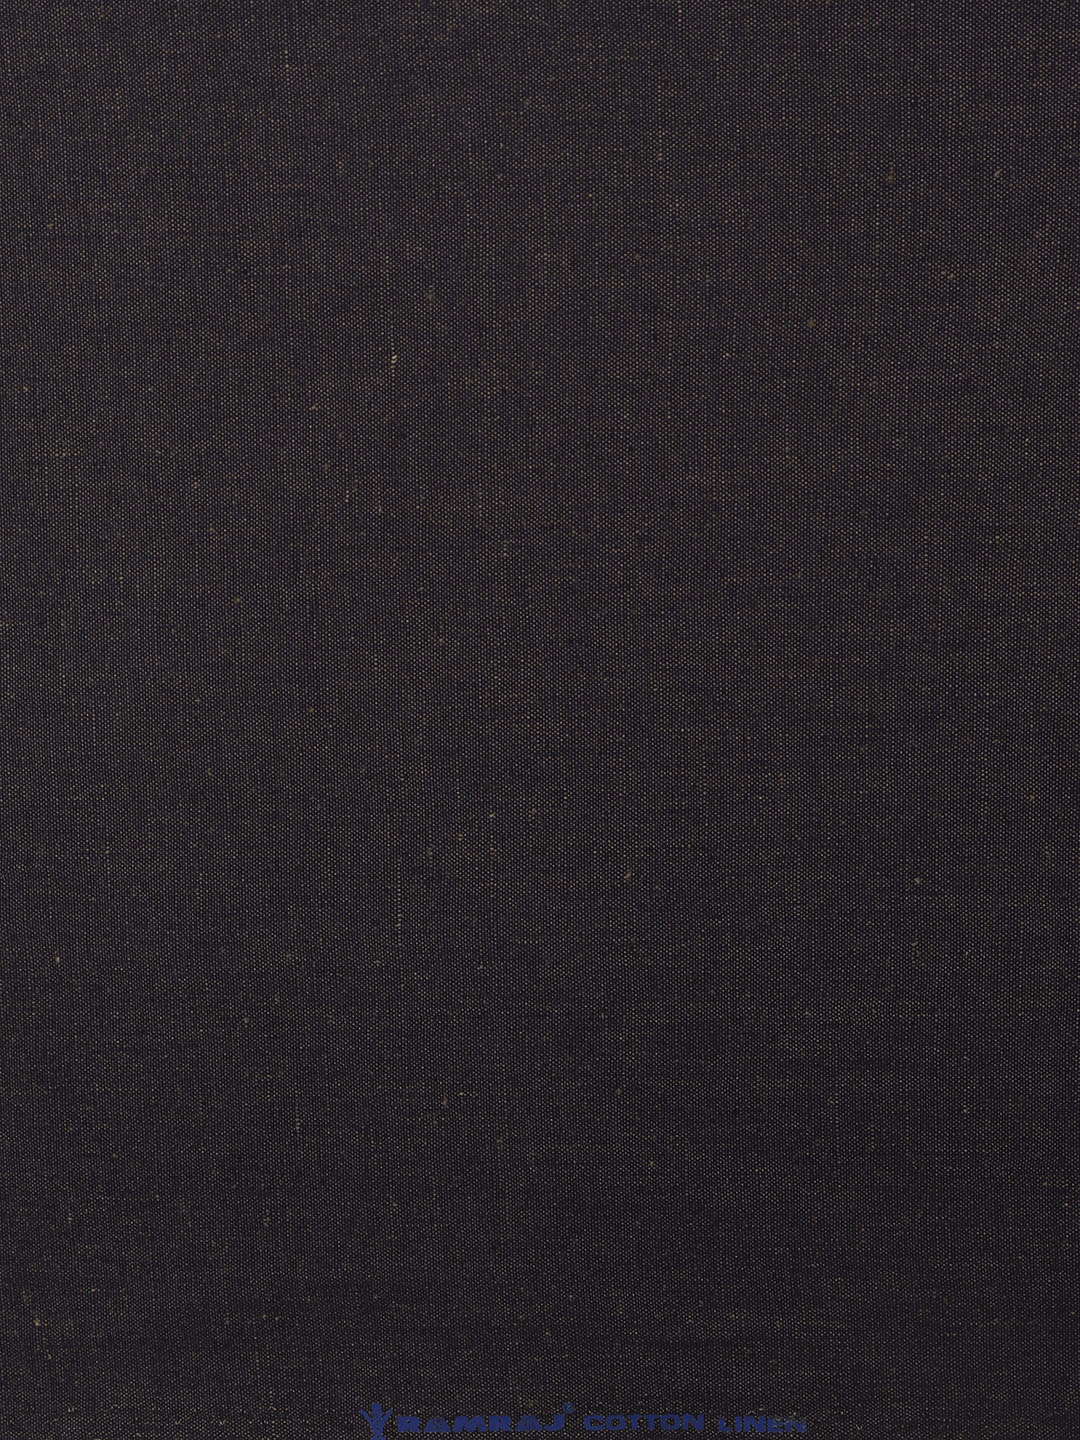 Linen Cotton Garland Suiting Fabric Black